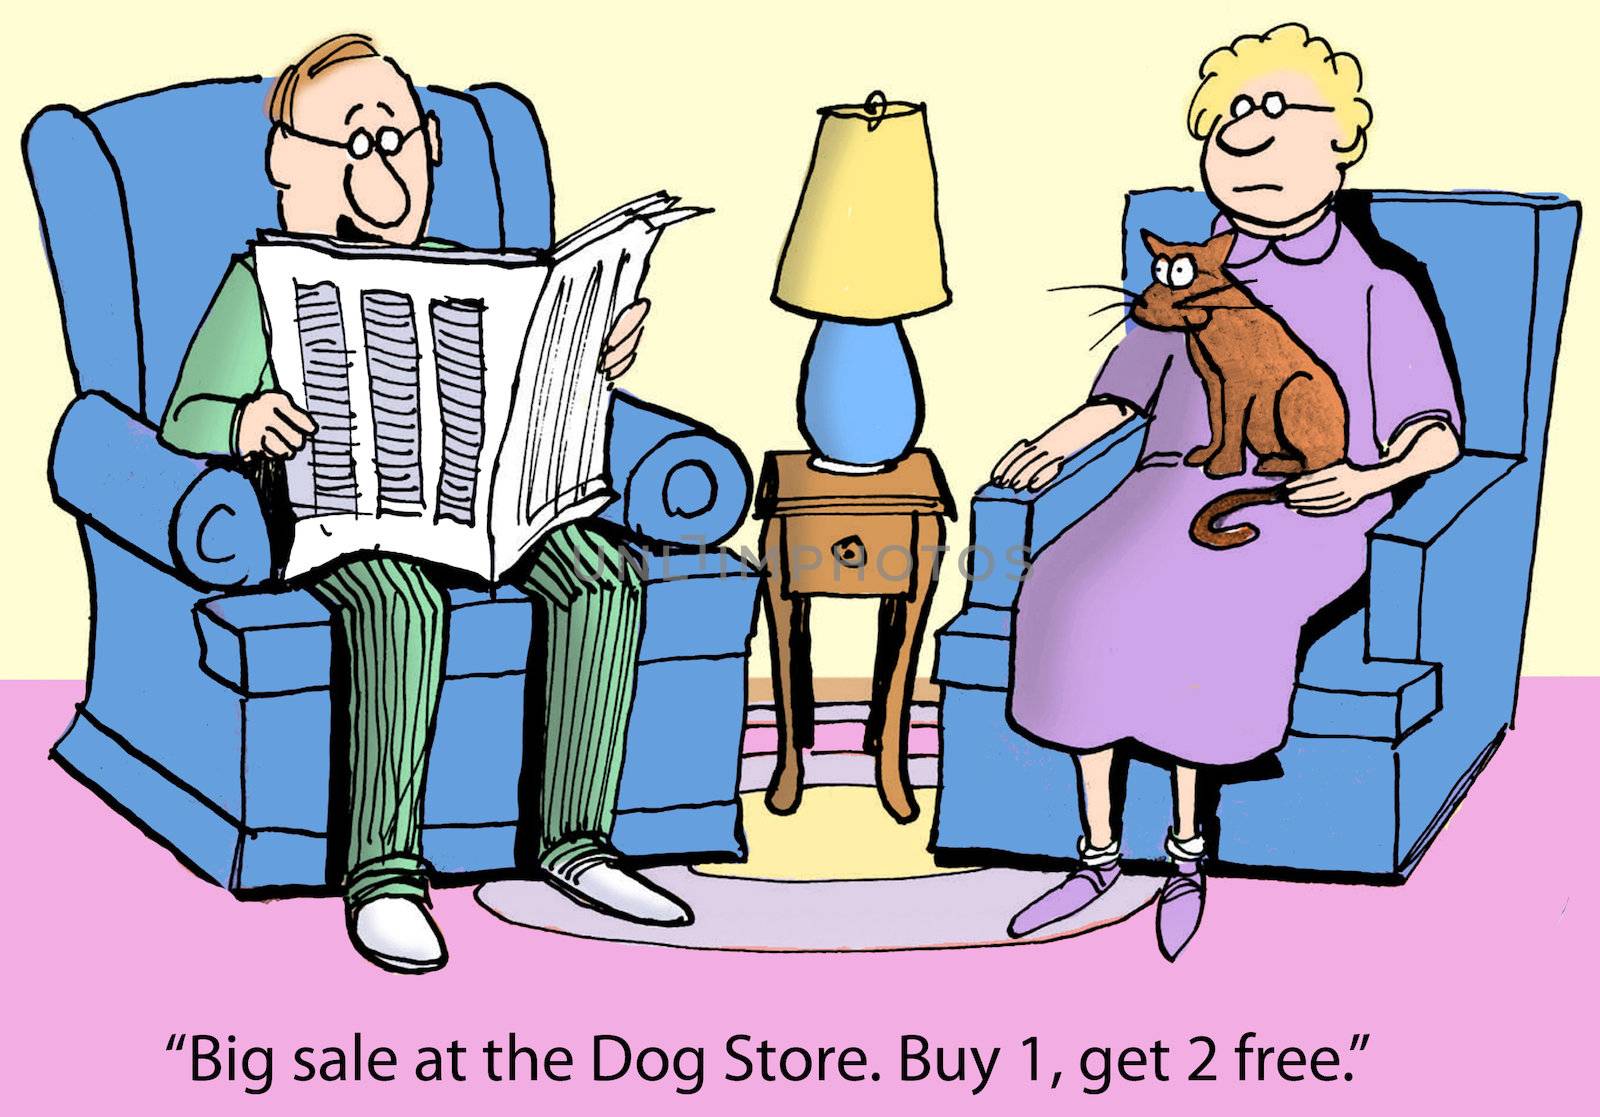 "Big sale at the Dog Store. Buy 1, get 2 free."